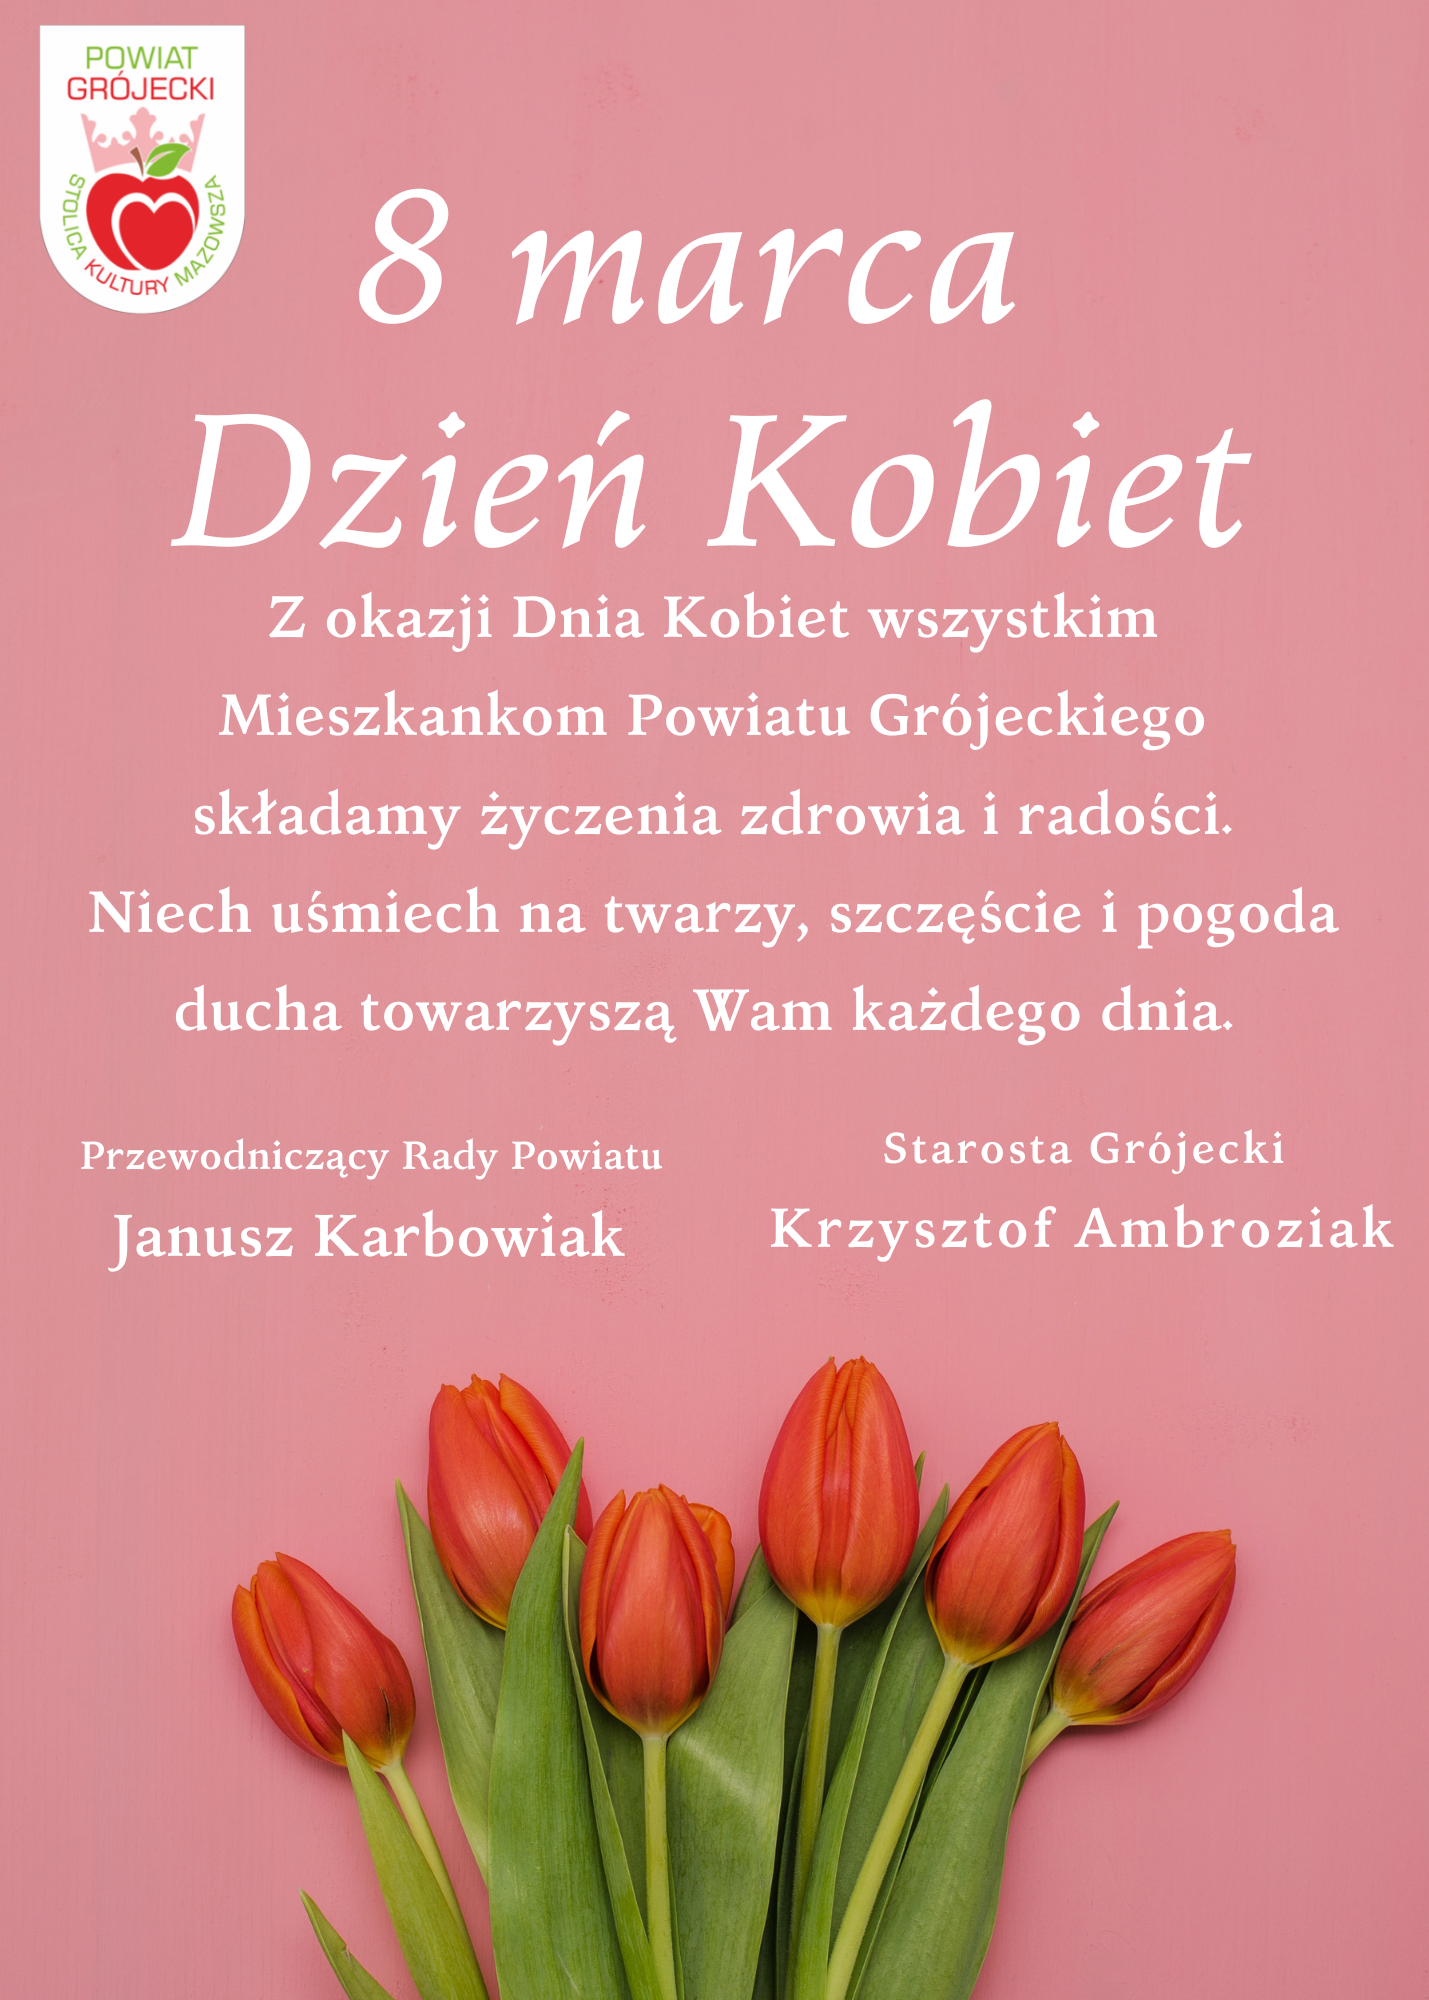 Pink Modern Women's Day Party Invitation.png (2.69 MB)